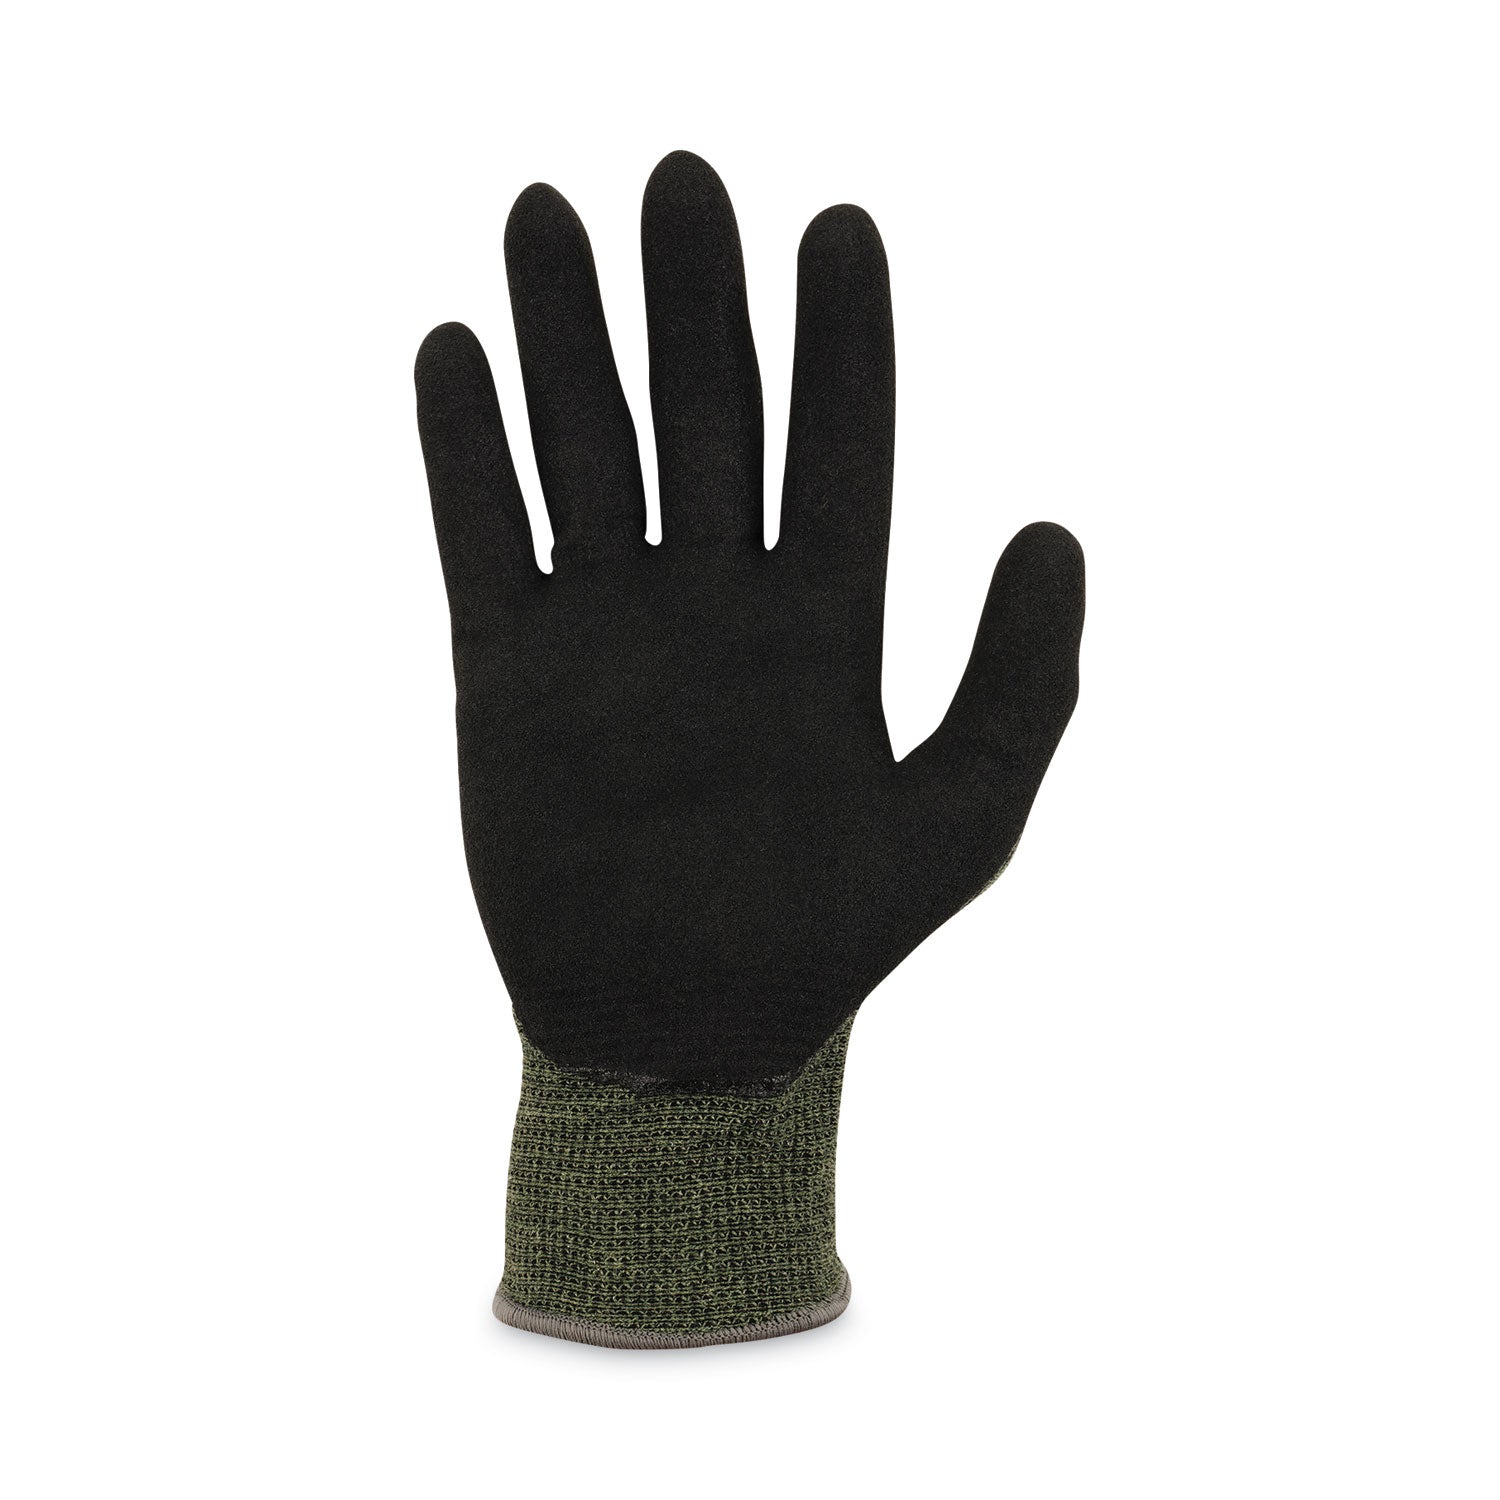 proflex-7042-ansi-a4-nitrile-coated-cr-gloves-green-2x-large-12-pairs-pack-ships-in-1-3-business-days_ego10336 - 3